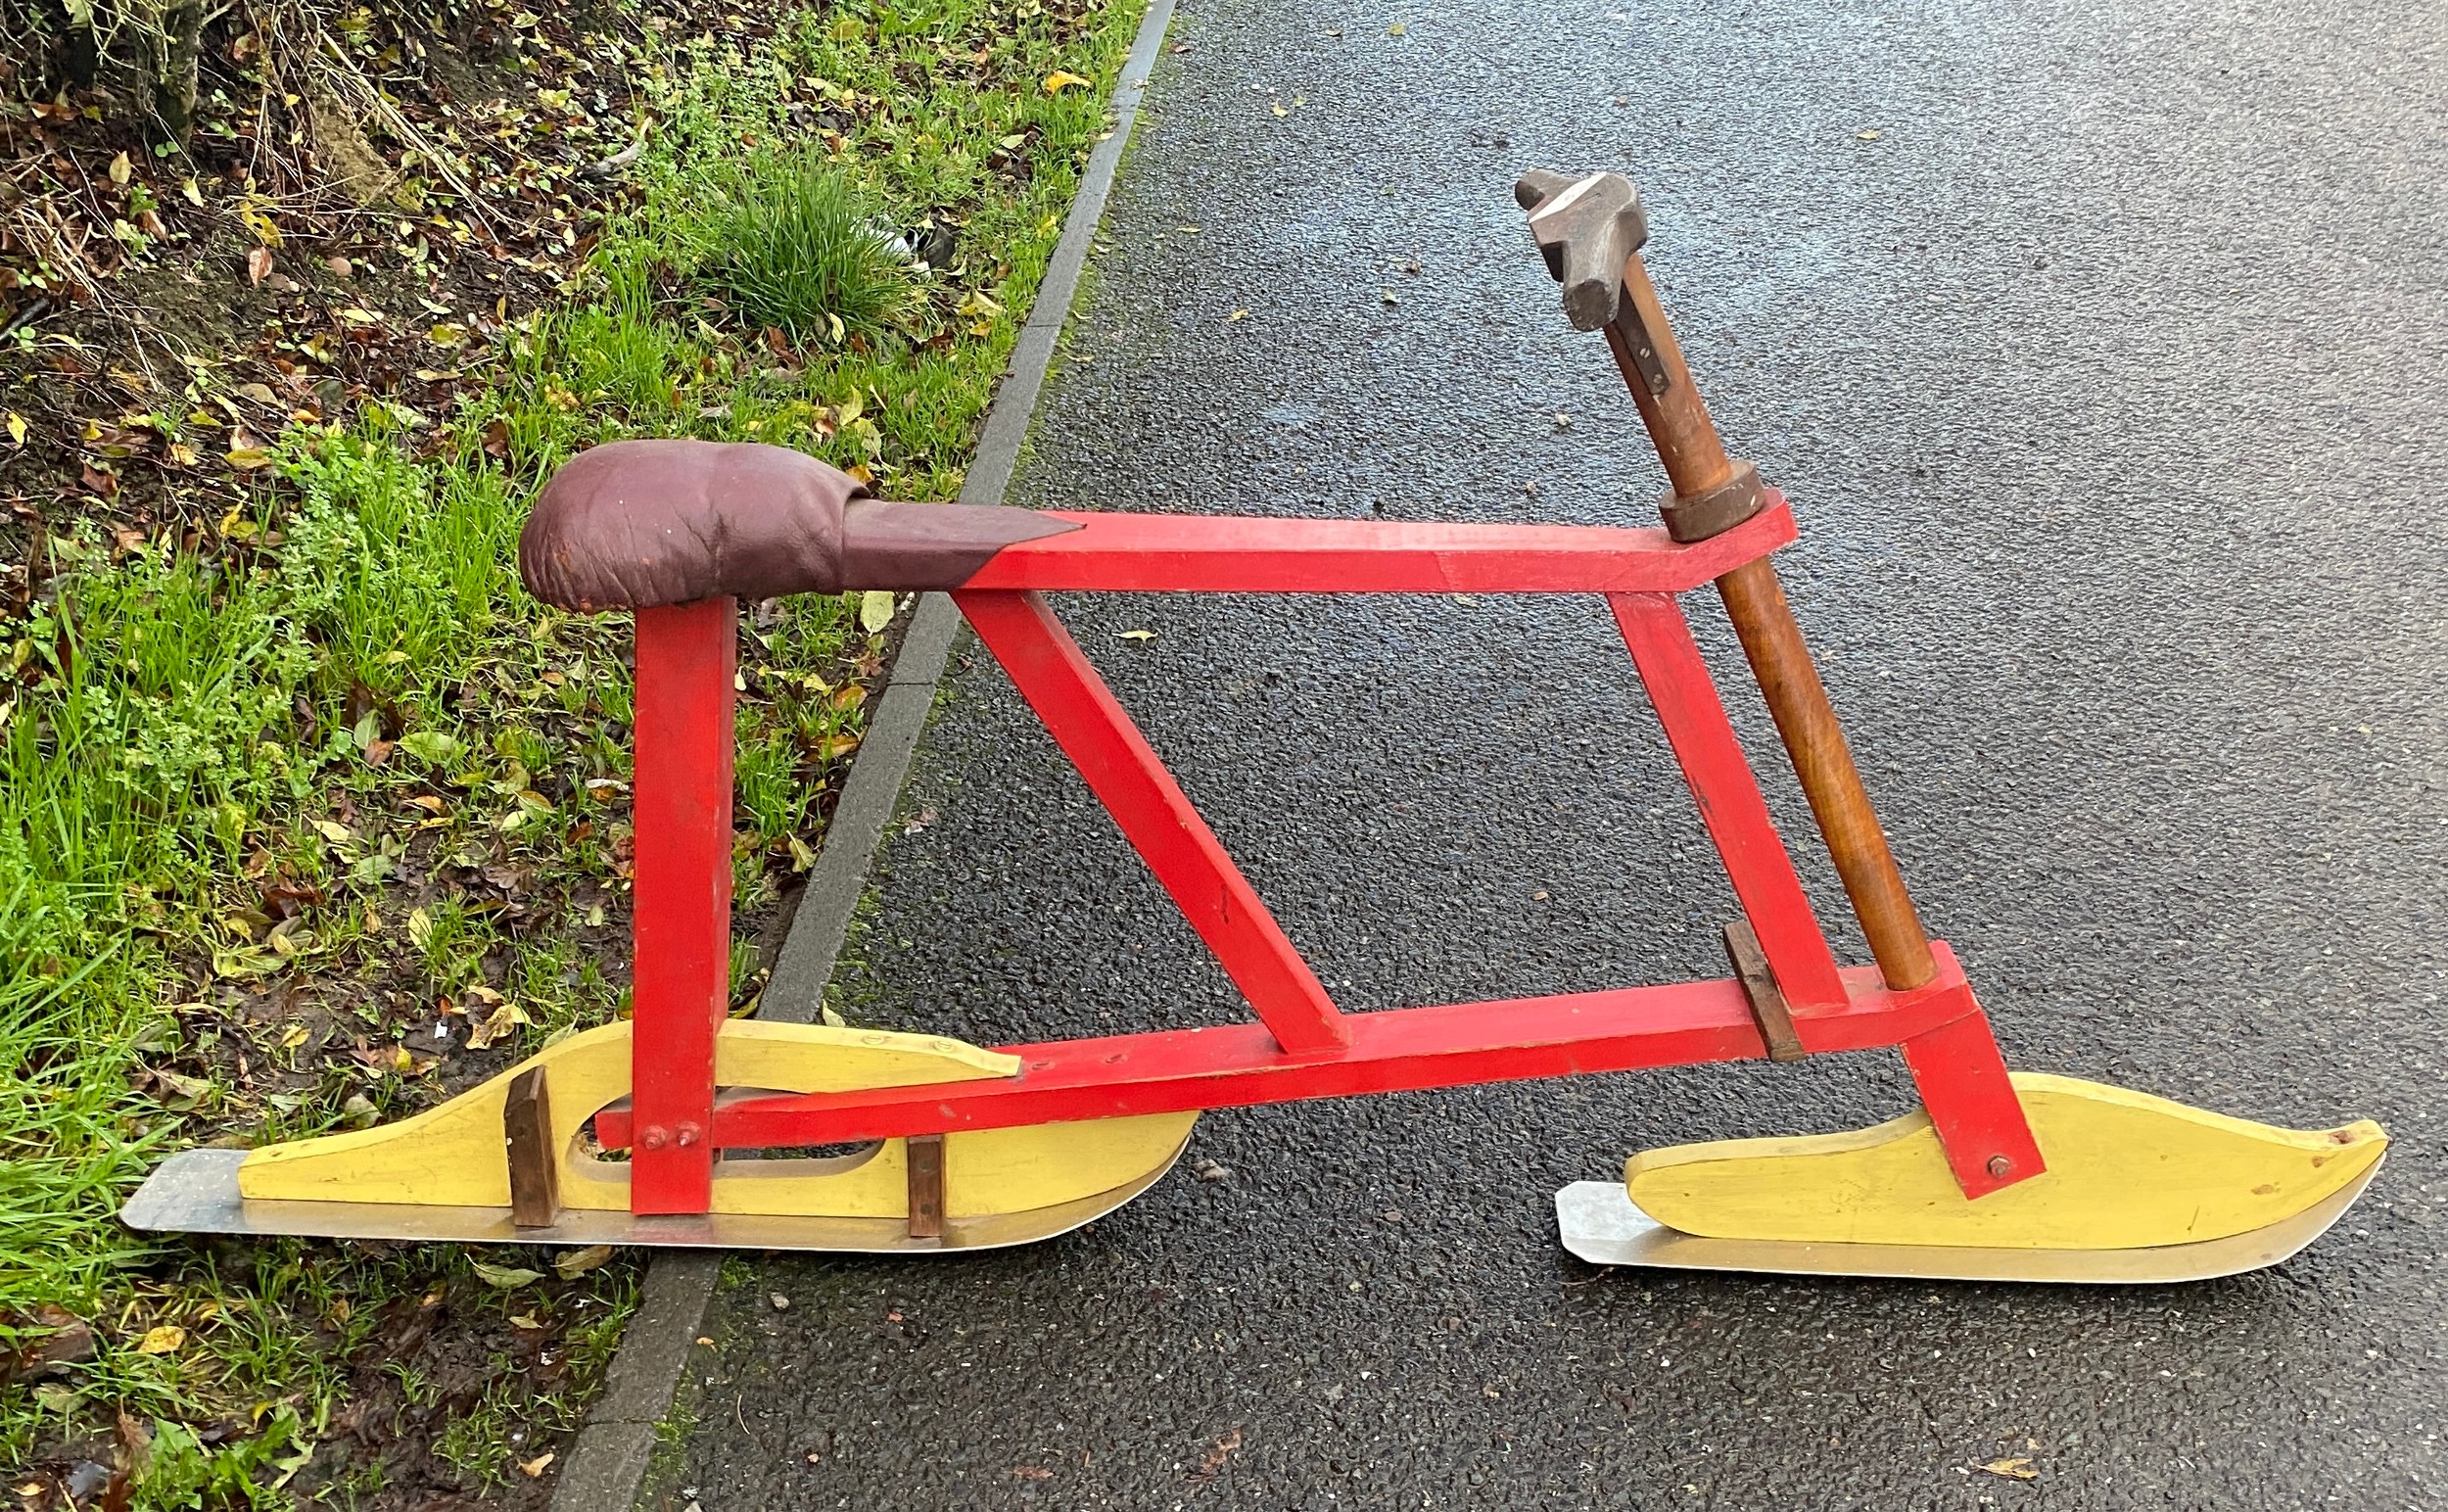 Vintage wooden ski bike 57 inches long and 27 inches high - Image 2 of 3